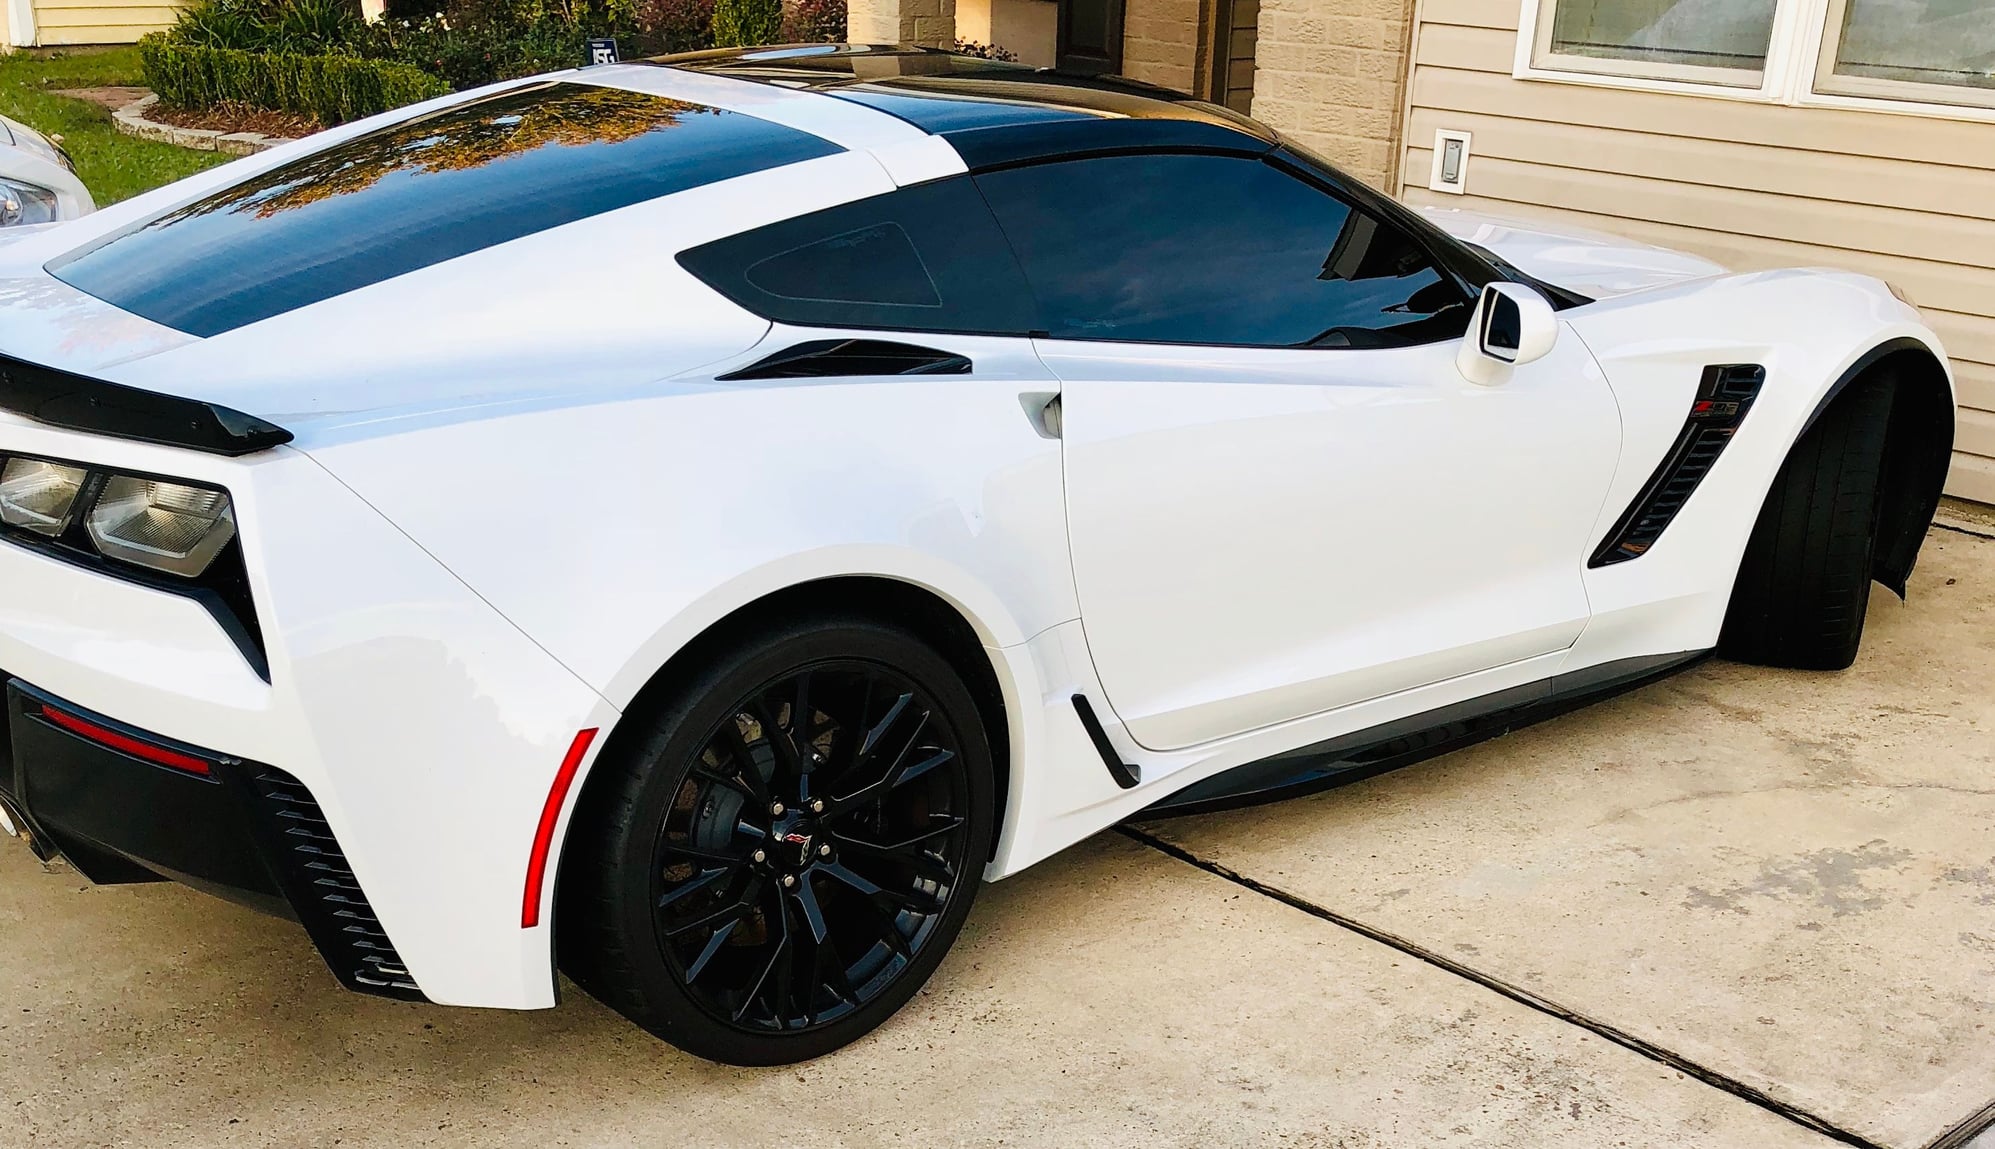 FS (For Sale) 2019 Arctic White Z06 with 2,500 miles. $76,000